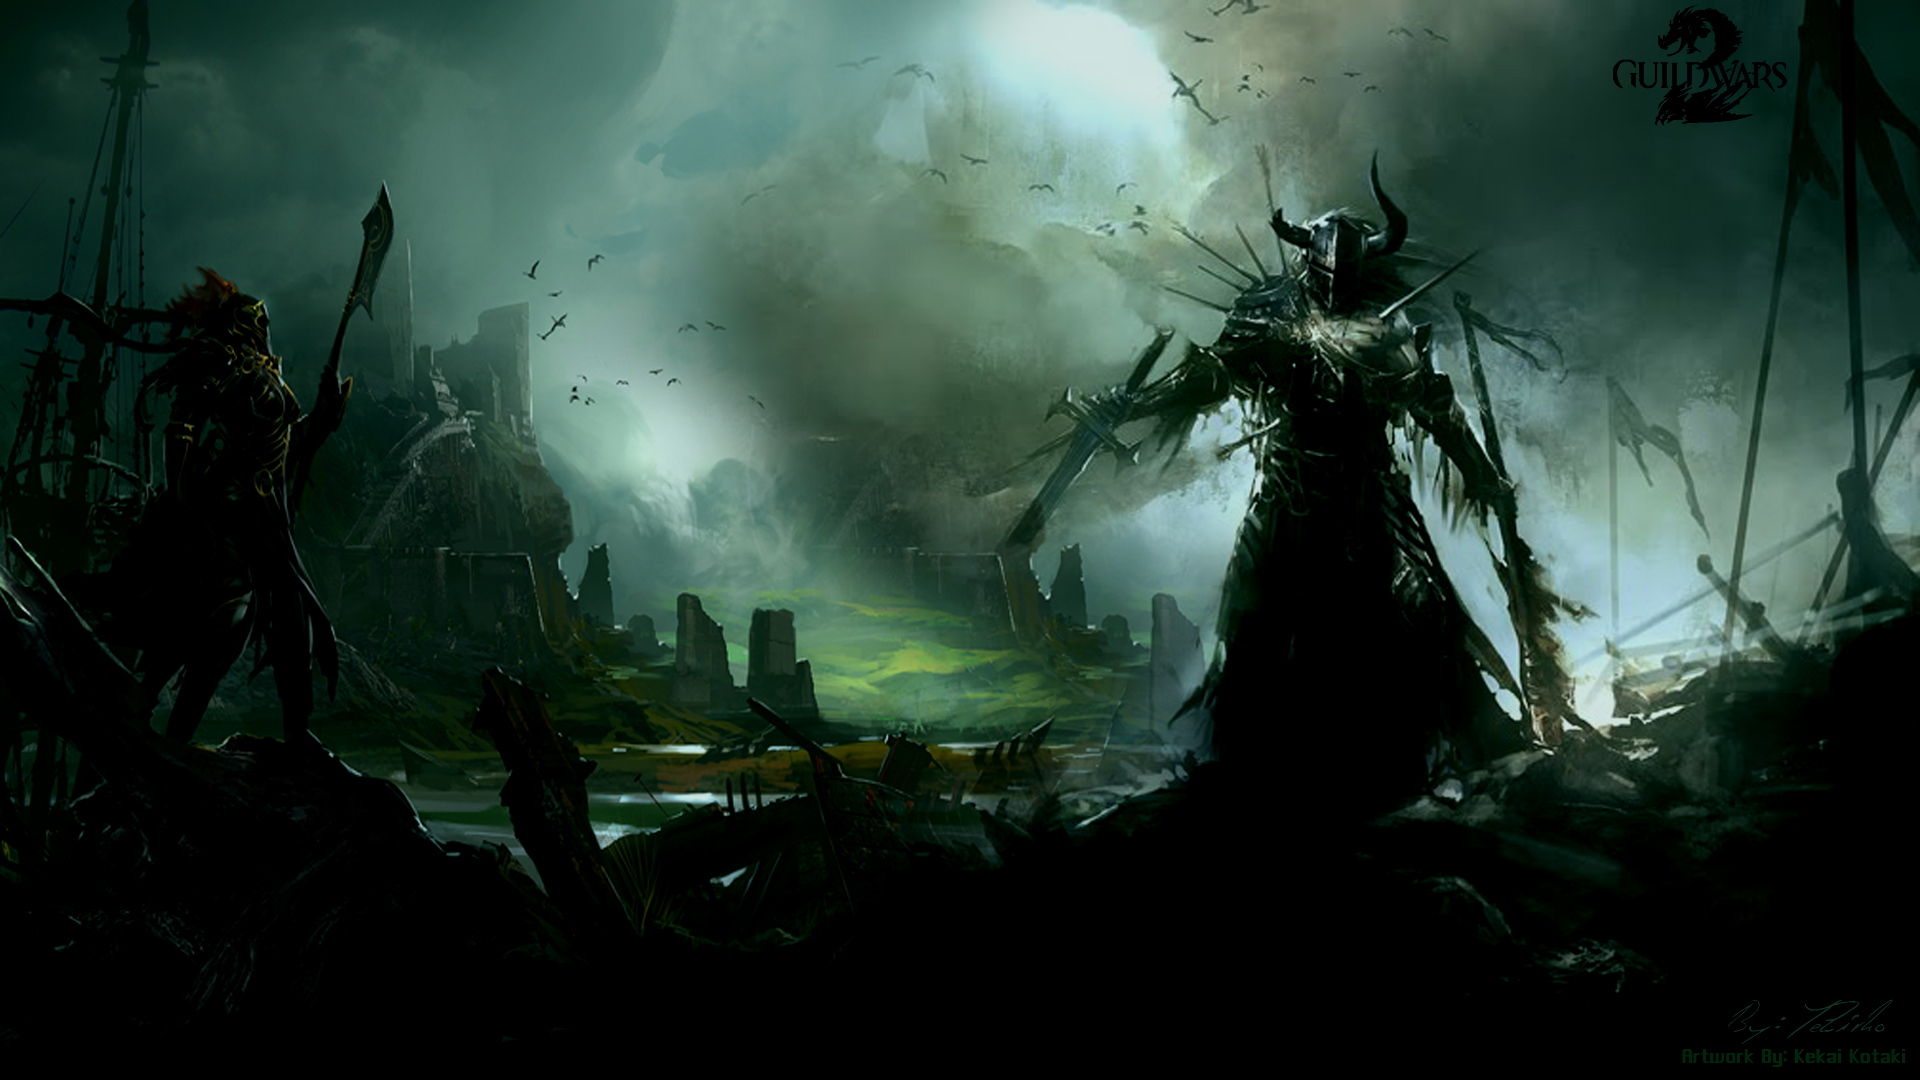 Stunning Epic Wallpapers and Desktop Backgrounds 1920x1080